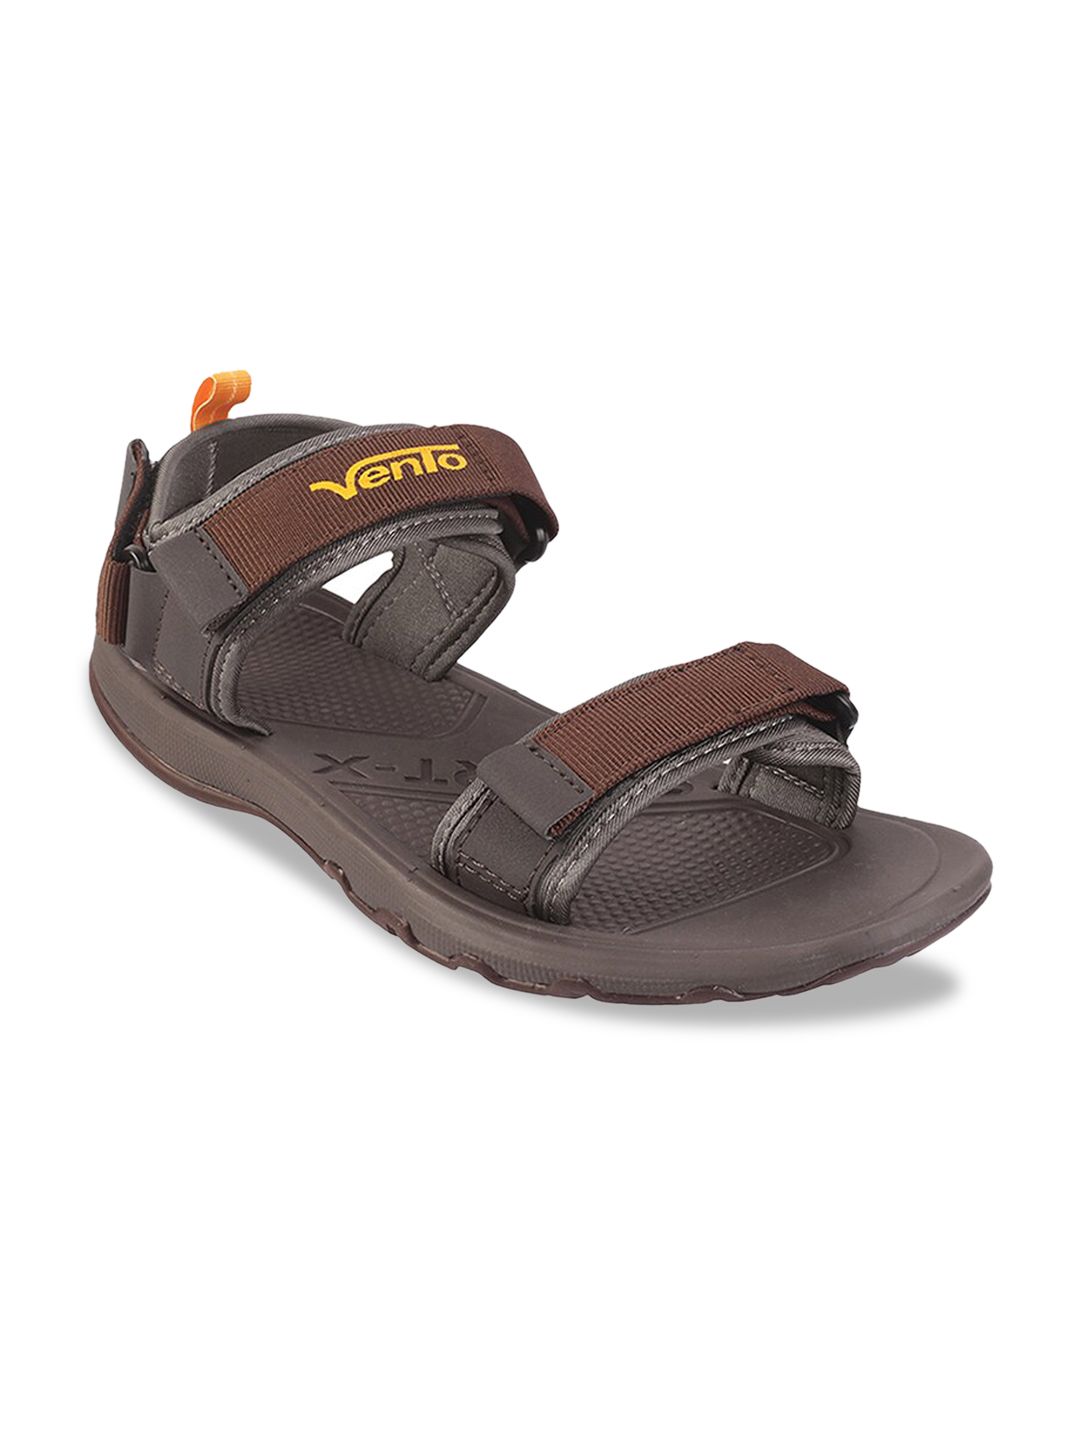 Vento Brown & Yellow Solid Sports Sandals Price in India